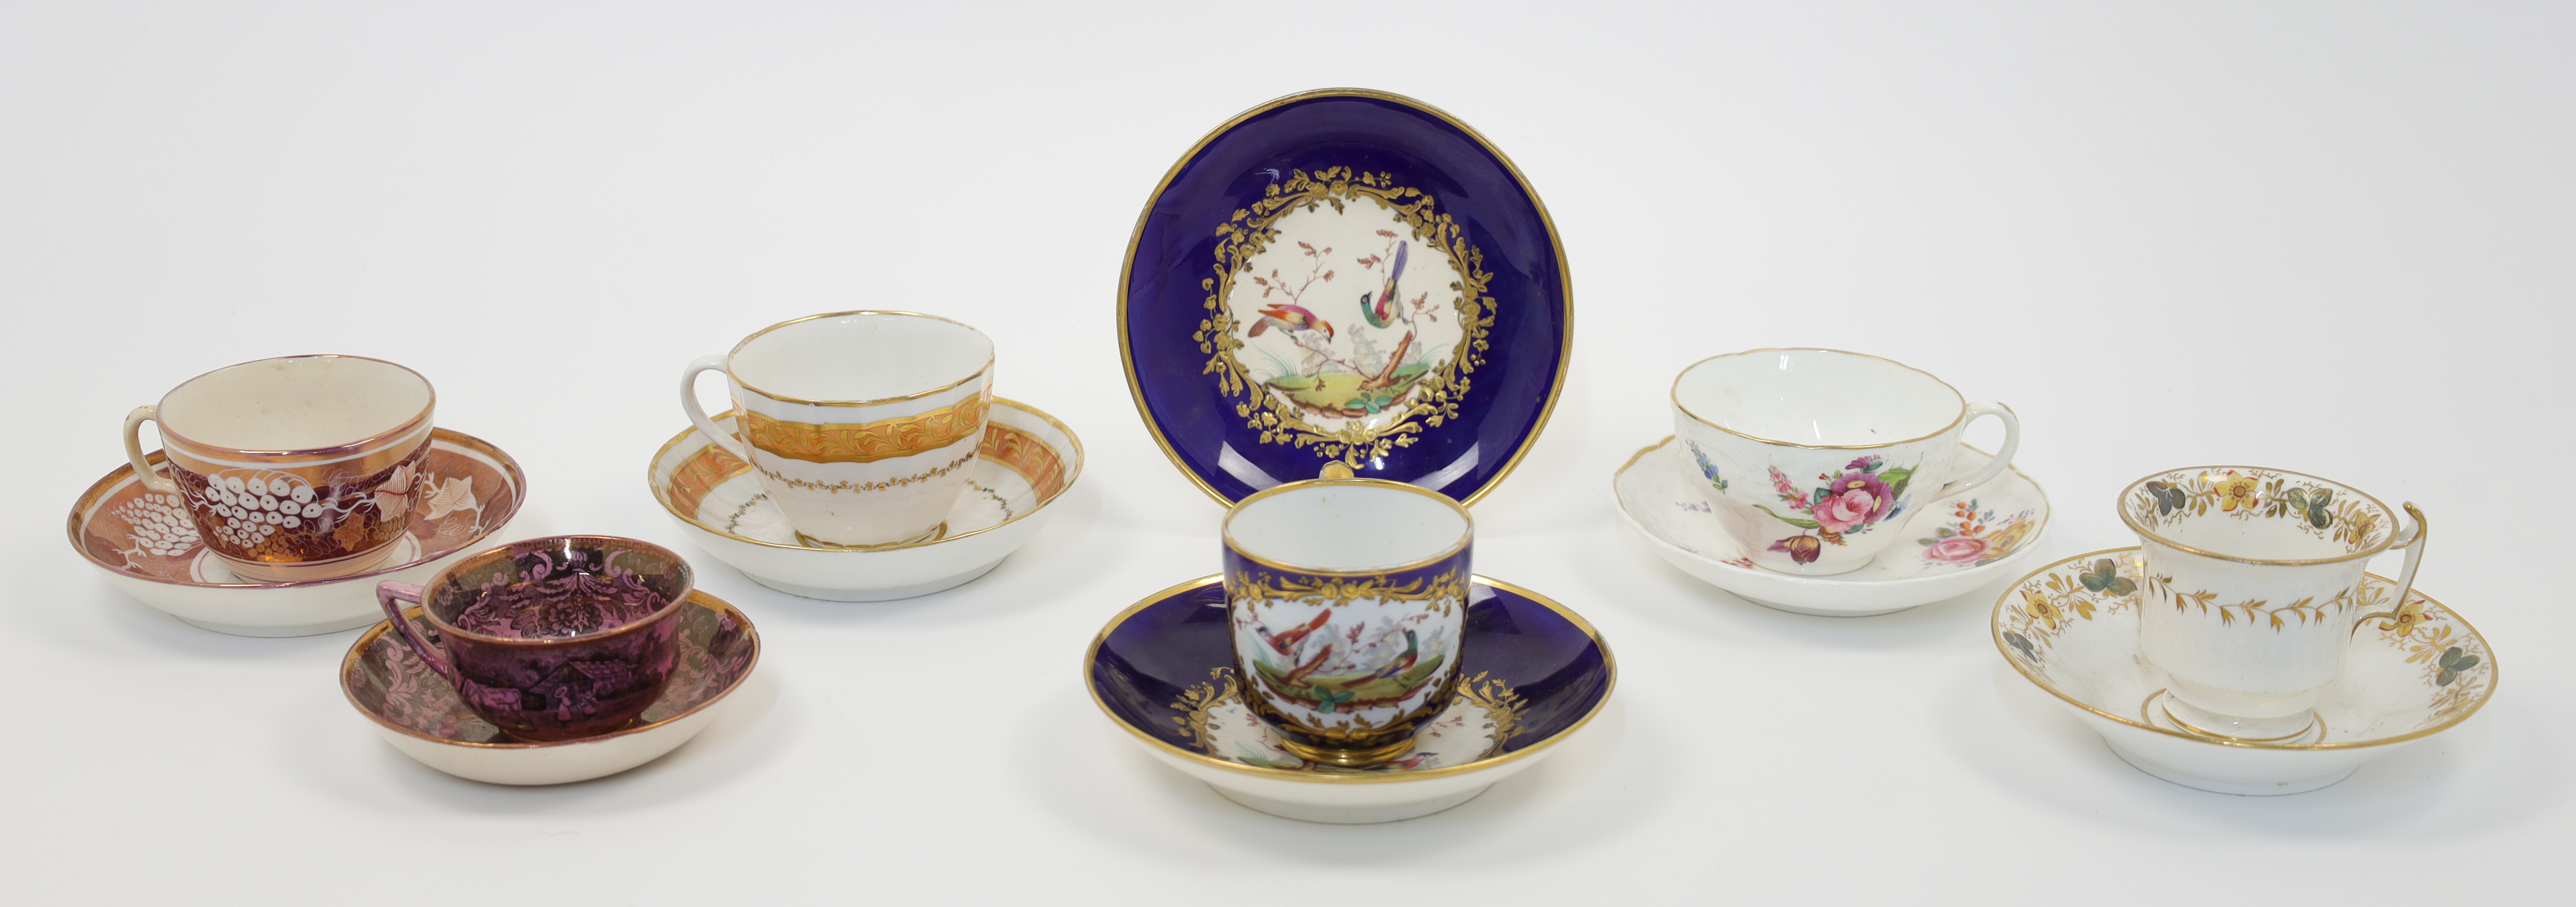 A group of English porcelain teacups and saucers, 19th century, comprising: a Bloor Derby teacup ...